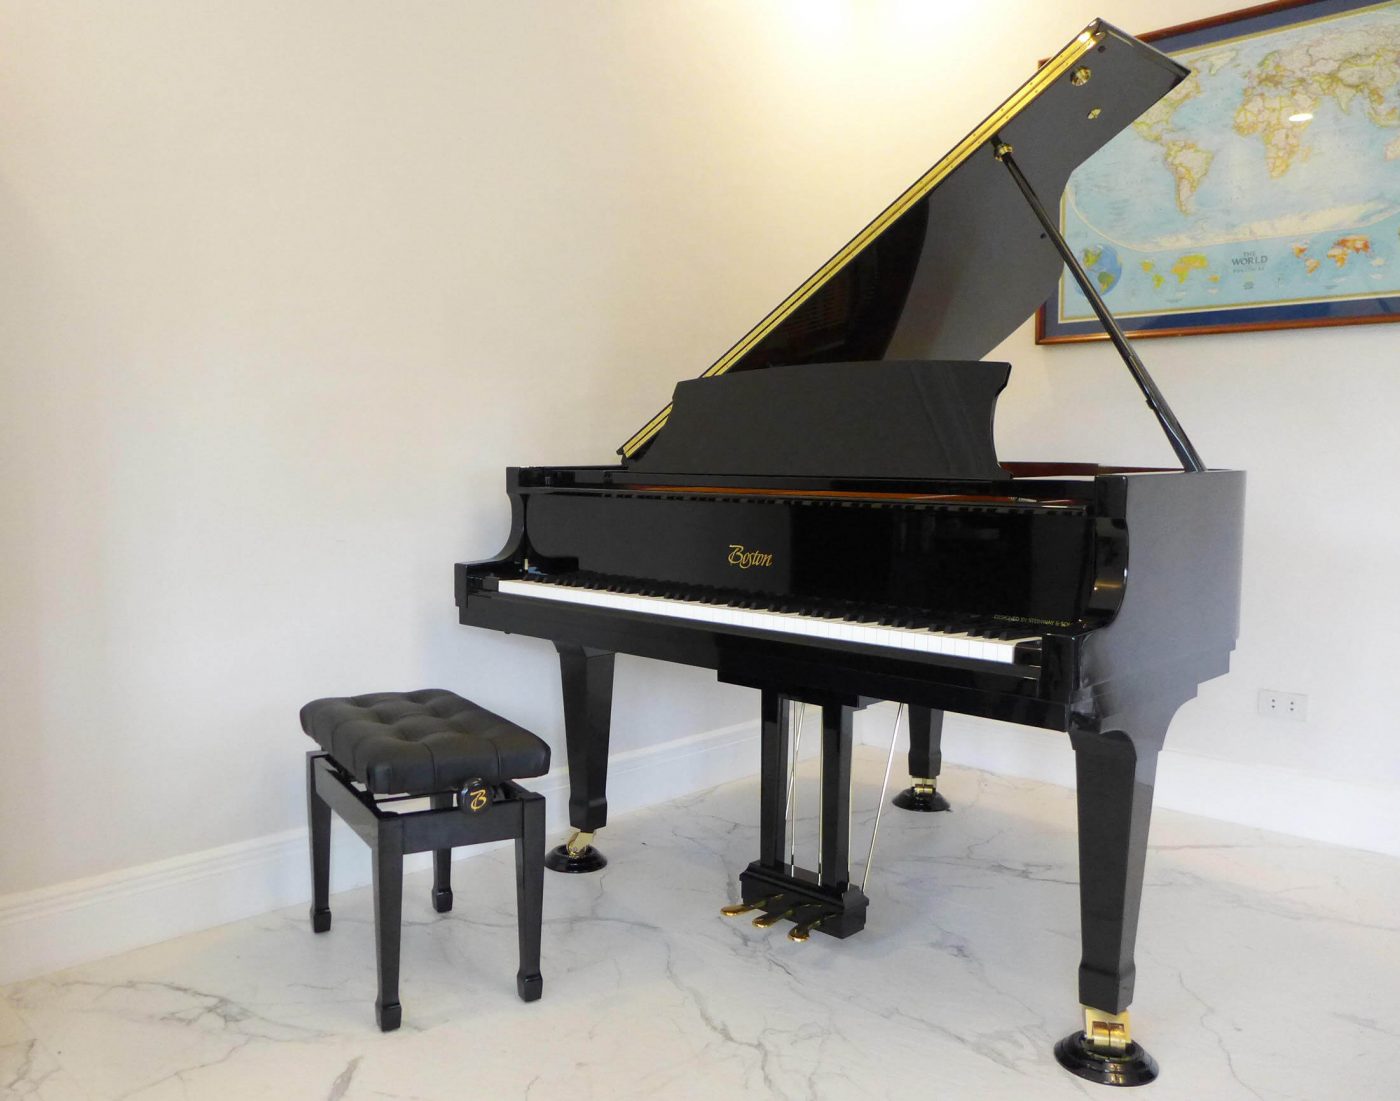 Boston GP-156 from the Steinway family of pianos